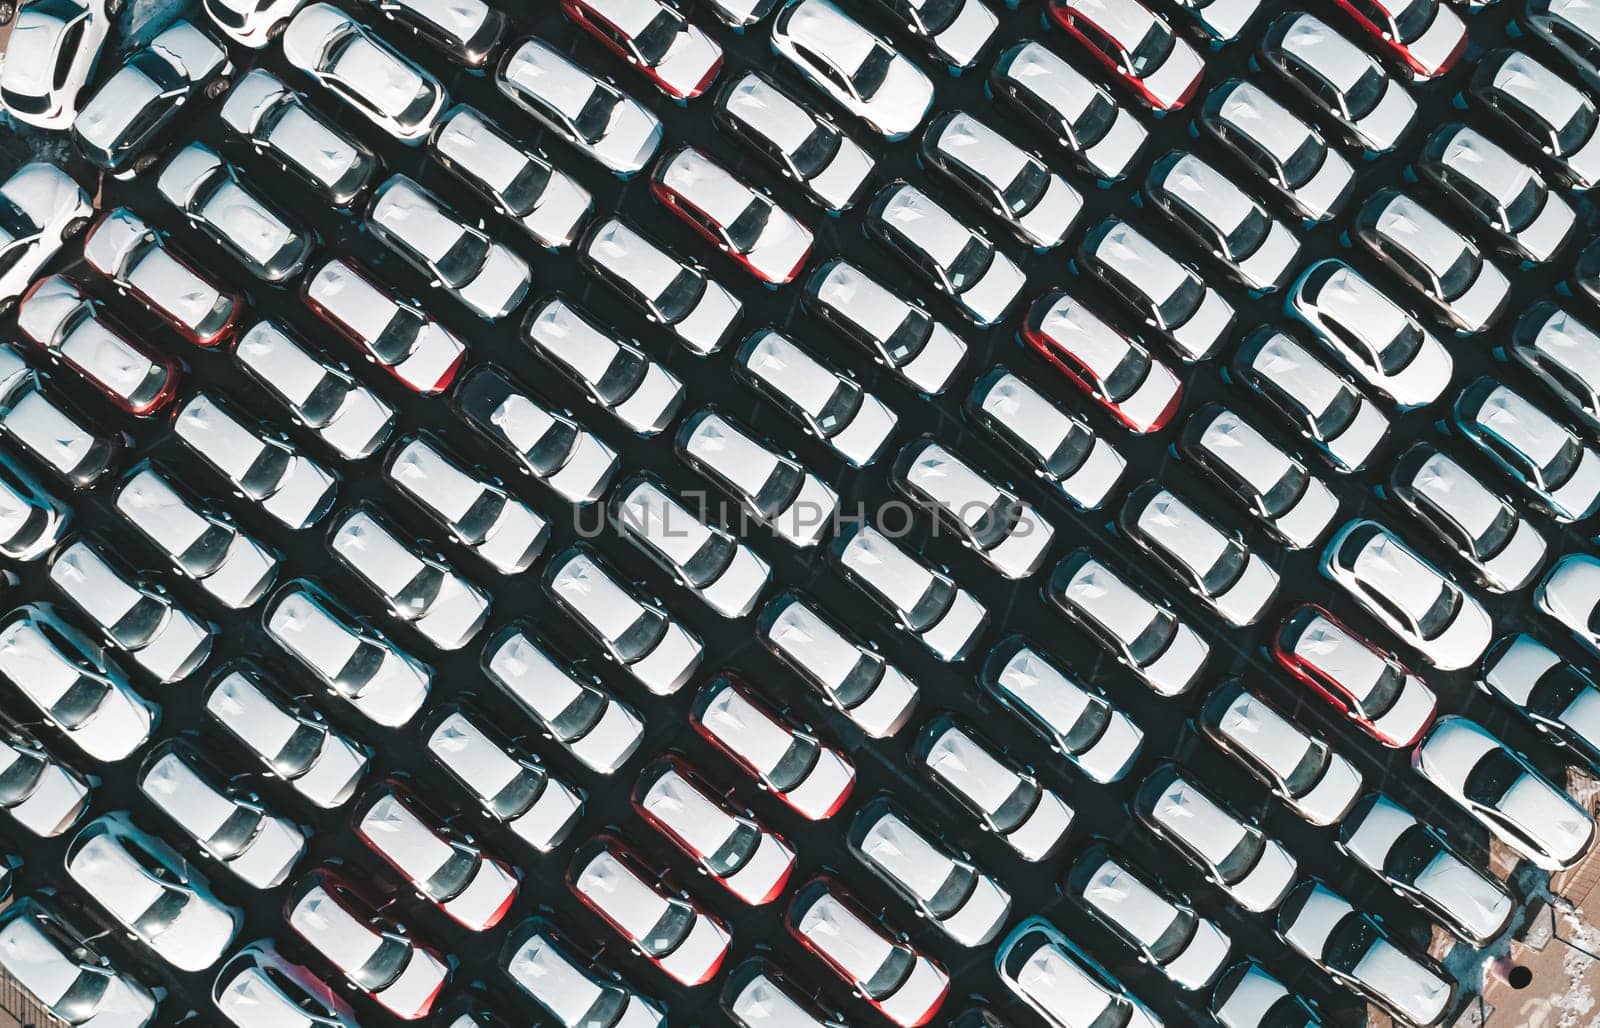 Aerial top down view of new cars parked in car parking lot. Car dealer parking lot full of new automobiles. New cars lined up for import and export business.